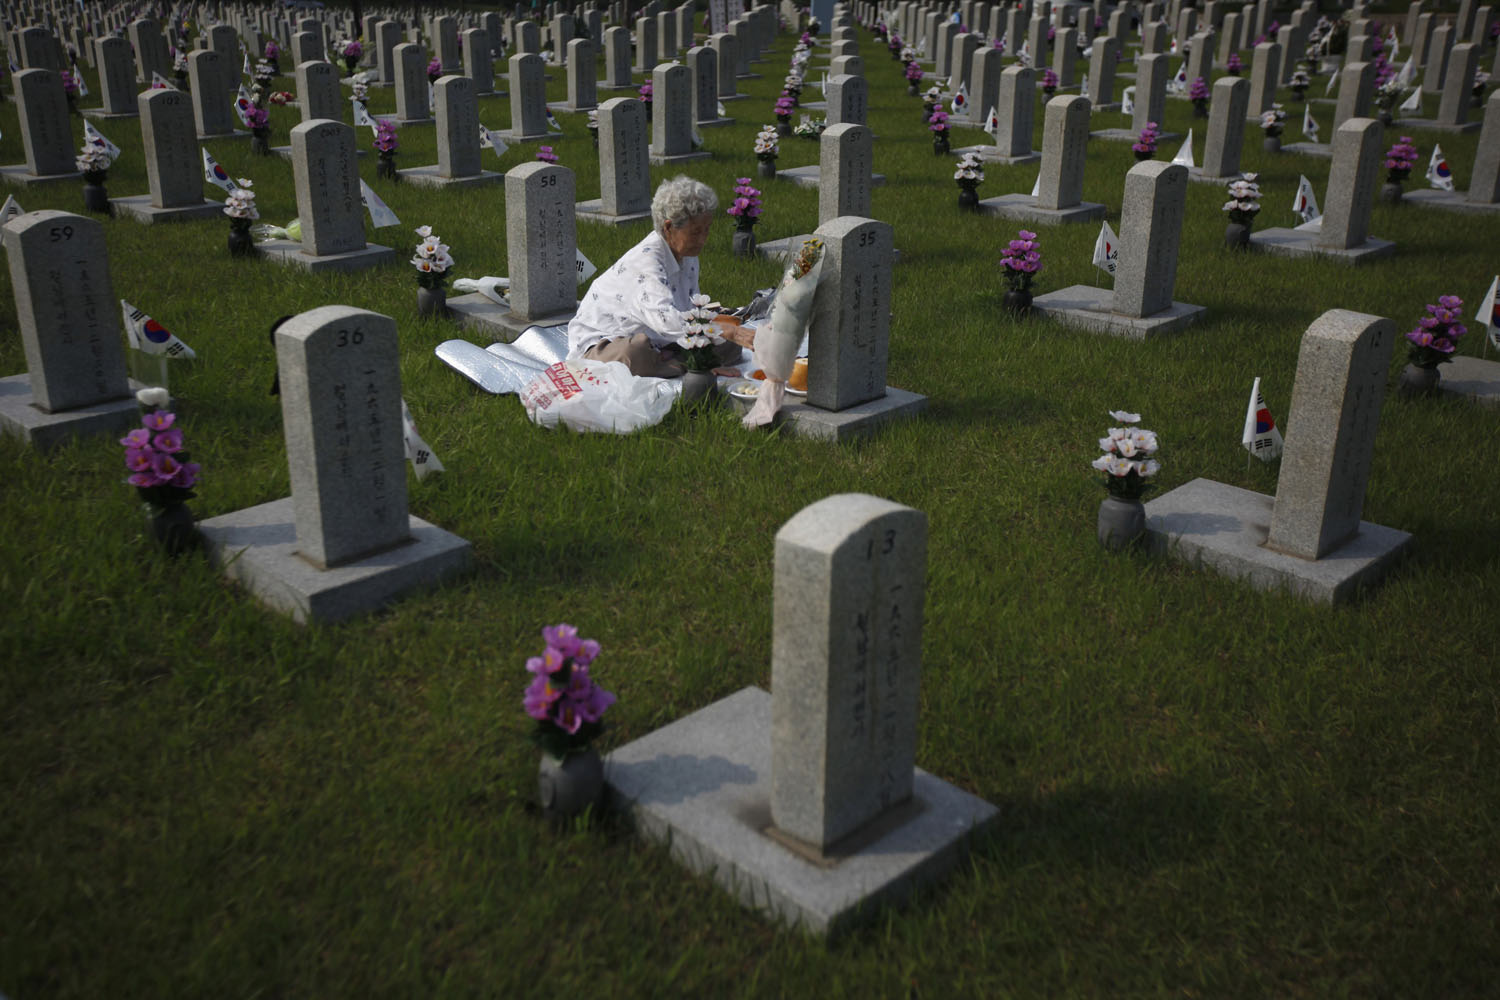 Woman pays her respects in front of the gravestone of her son who died for the country, at the national cemetery in Seoul